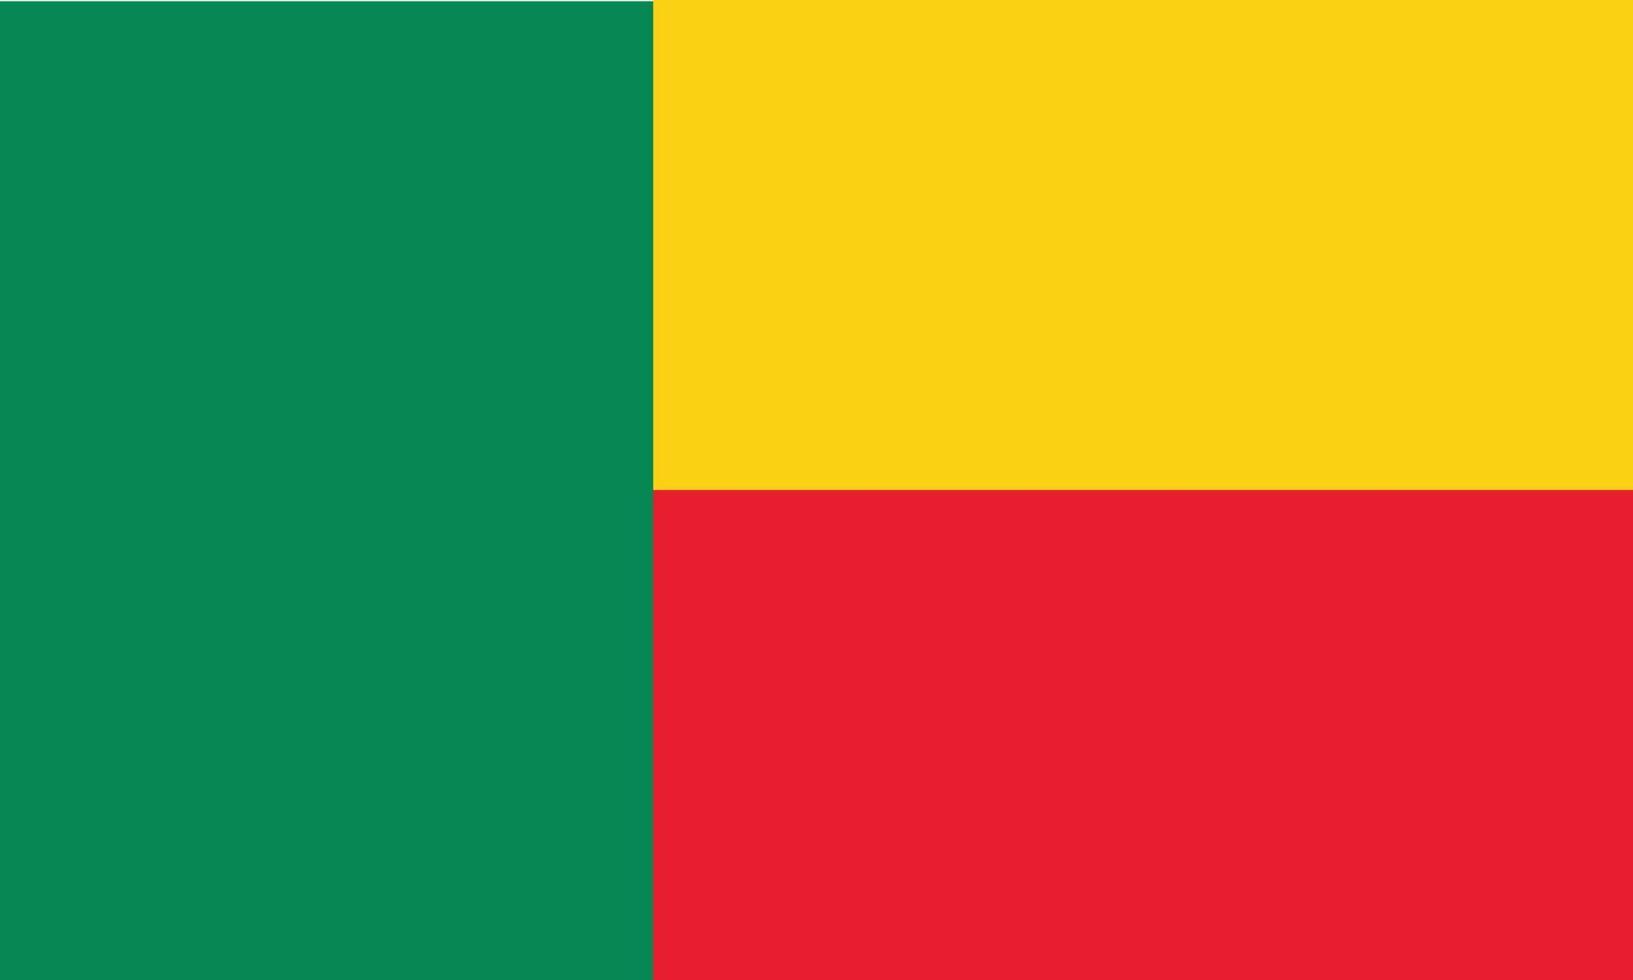 The national flag of Benin with correct proportion and official color vector